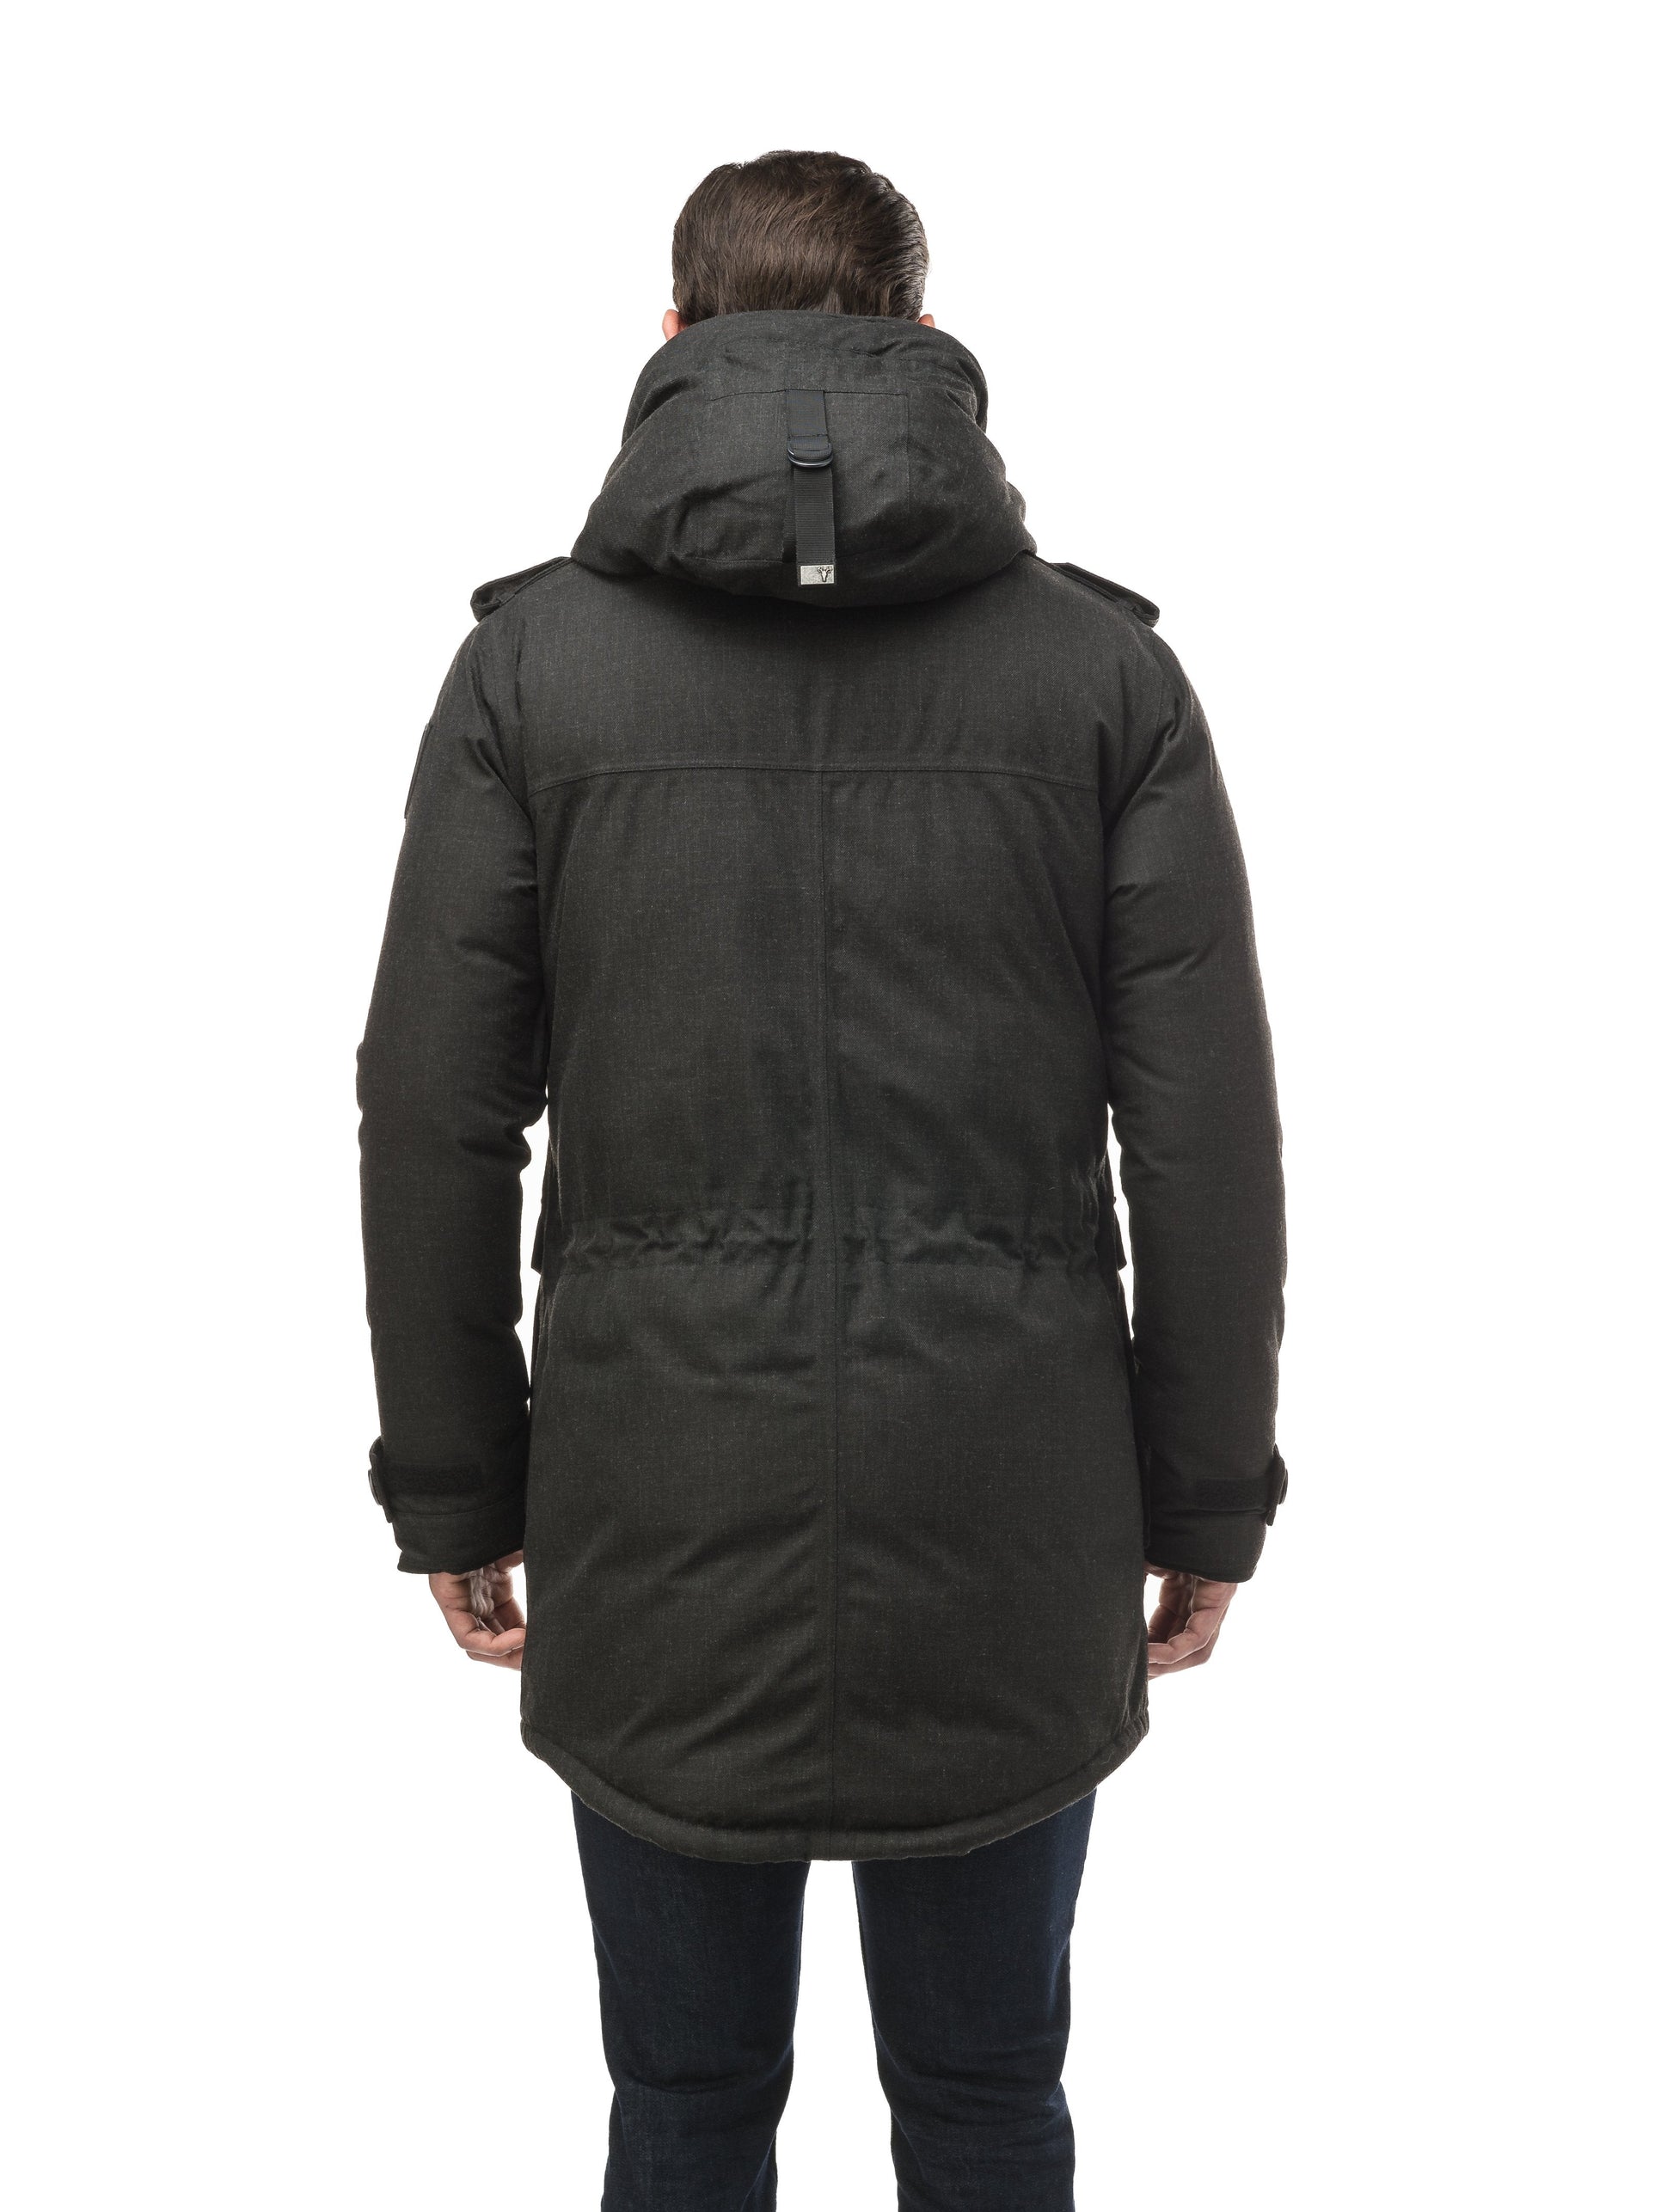 Men's down filled parka with faux button magnet closures and fur free hood with a fishtail hemline in H. Black